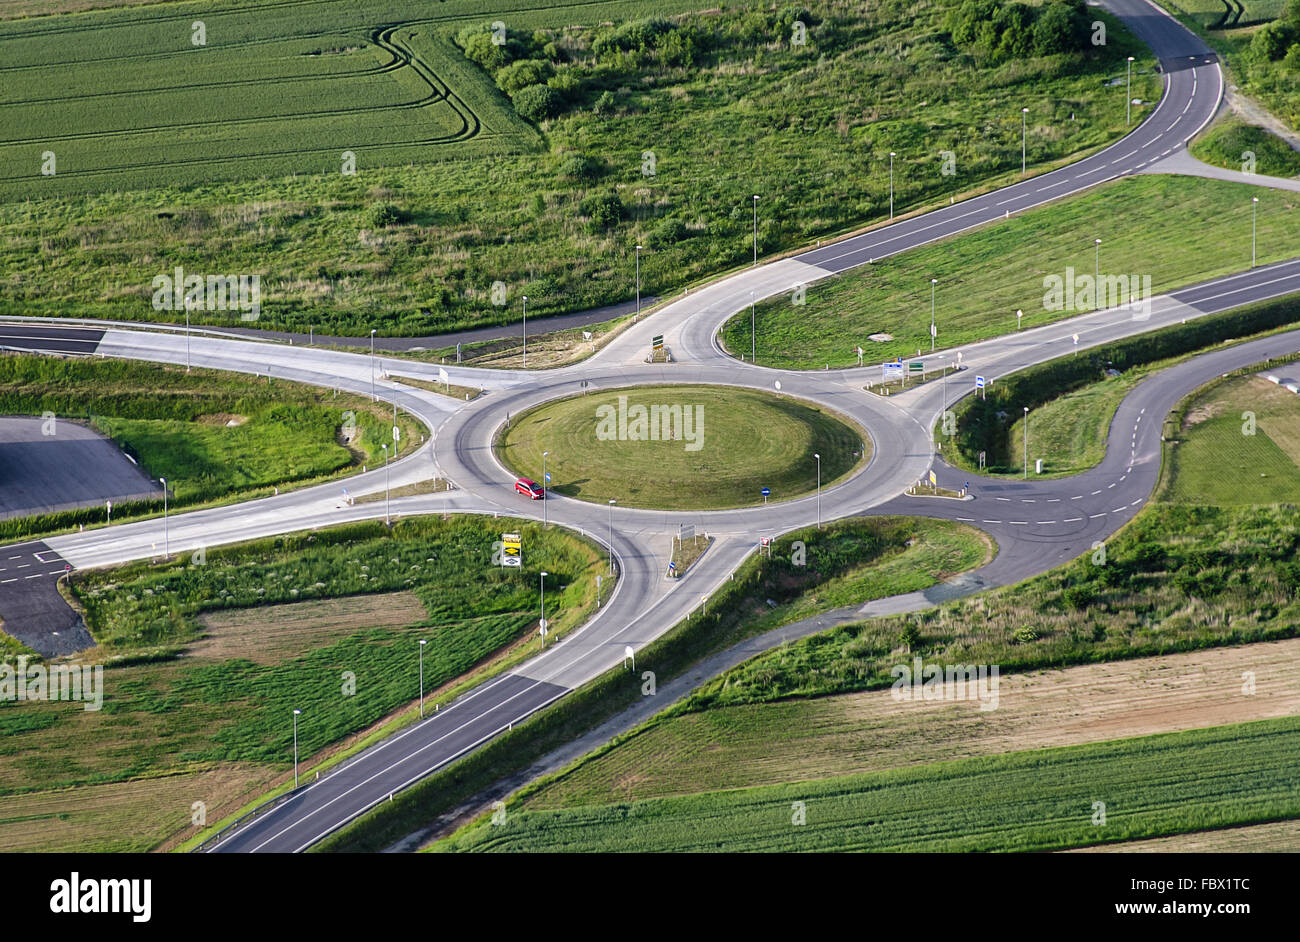 six streets discharging into a roundabout Stock Photo